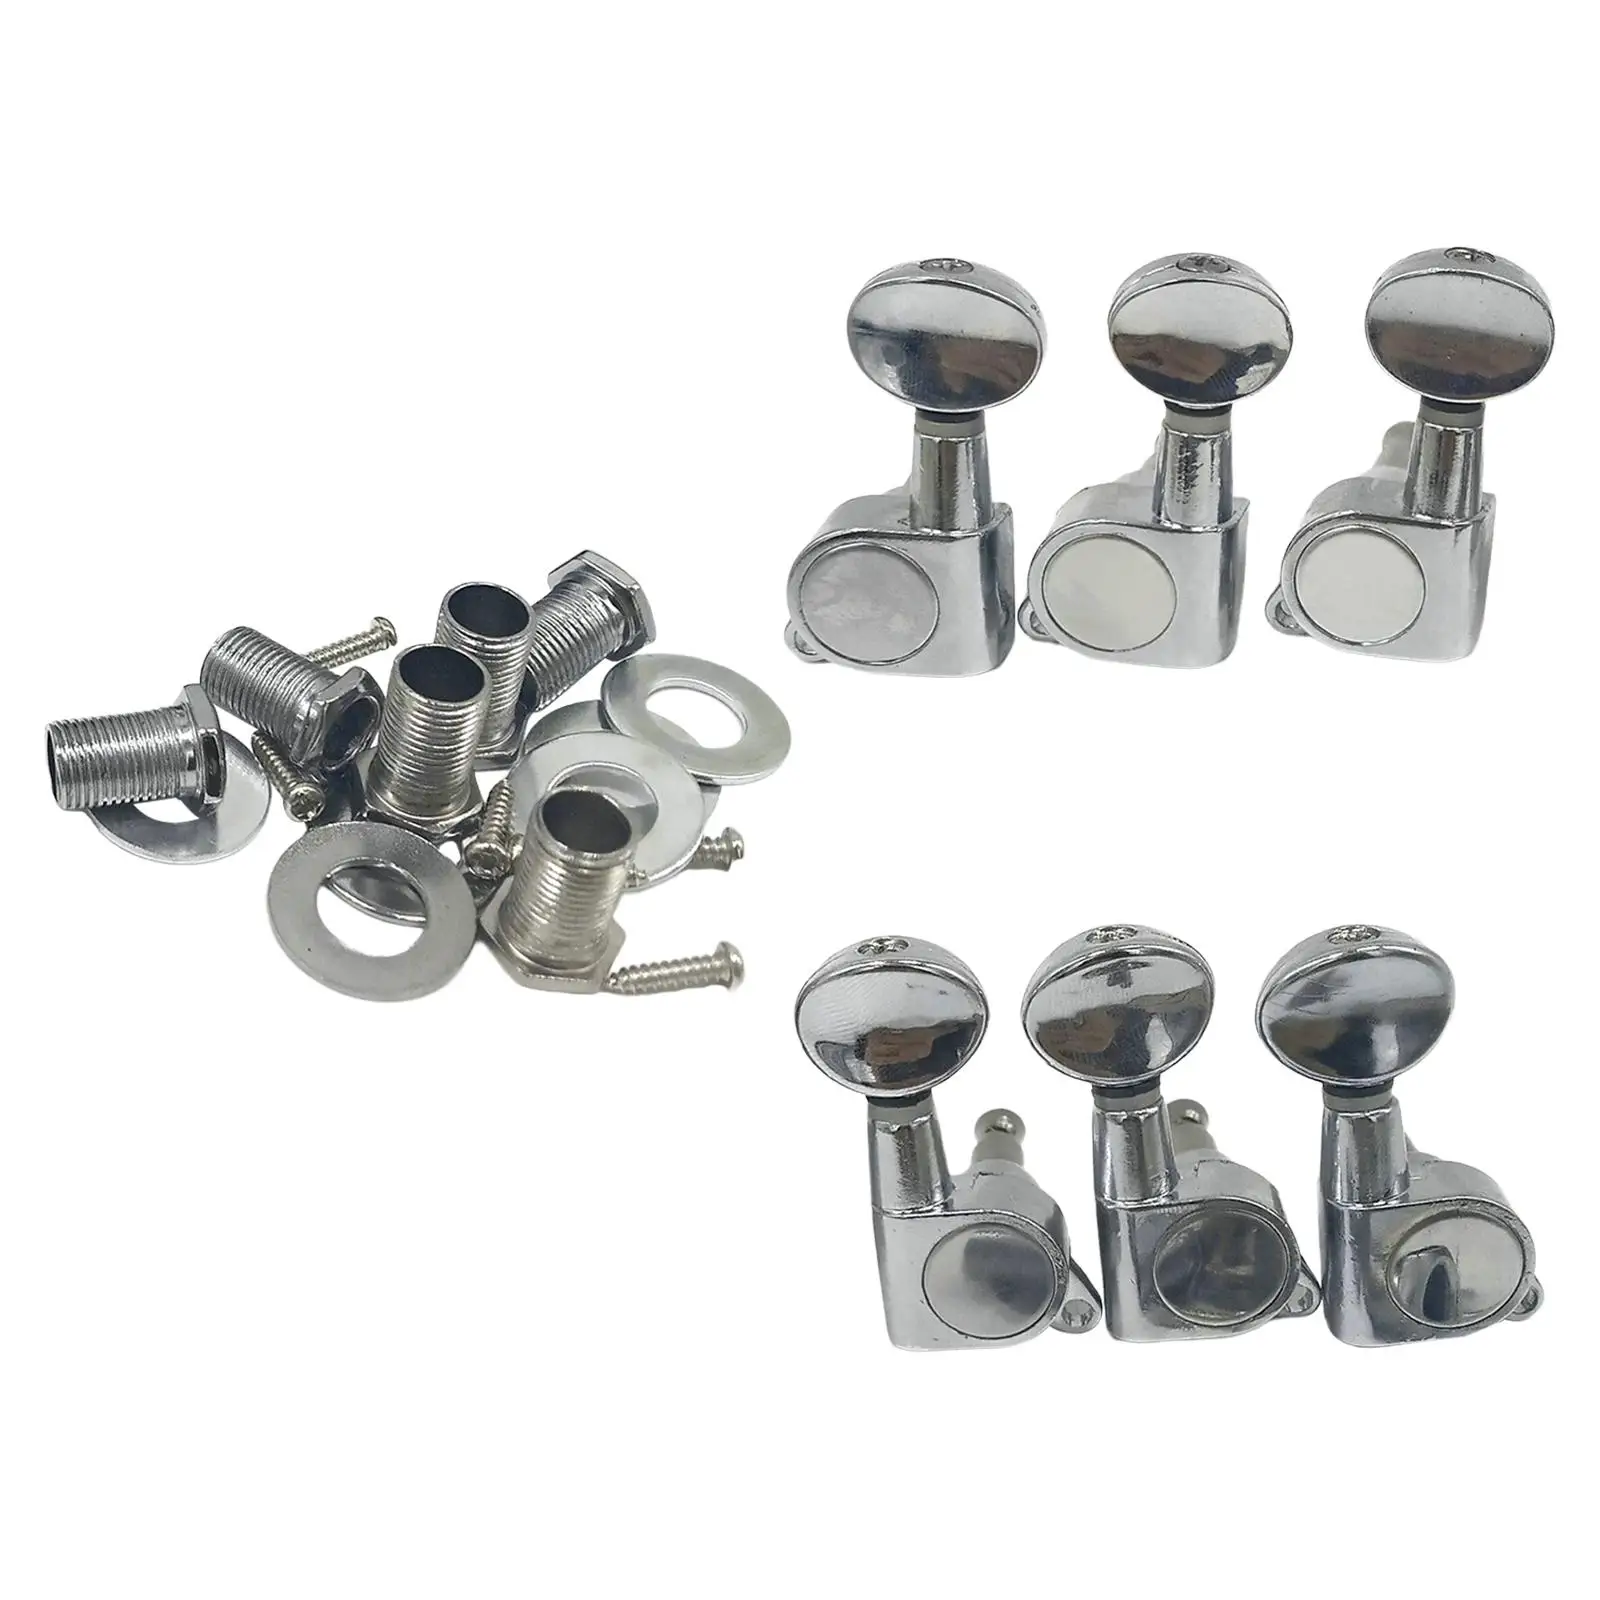 6x Guitar 3L 3R Sealed String Button Tuning Pegs for Acoustic Guitar Parts